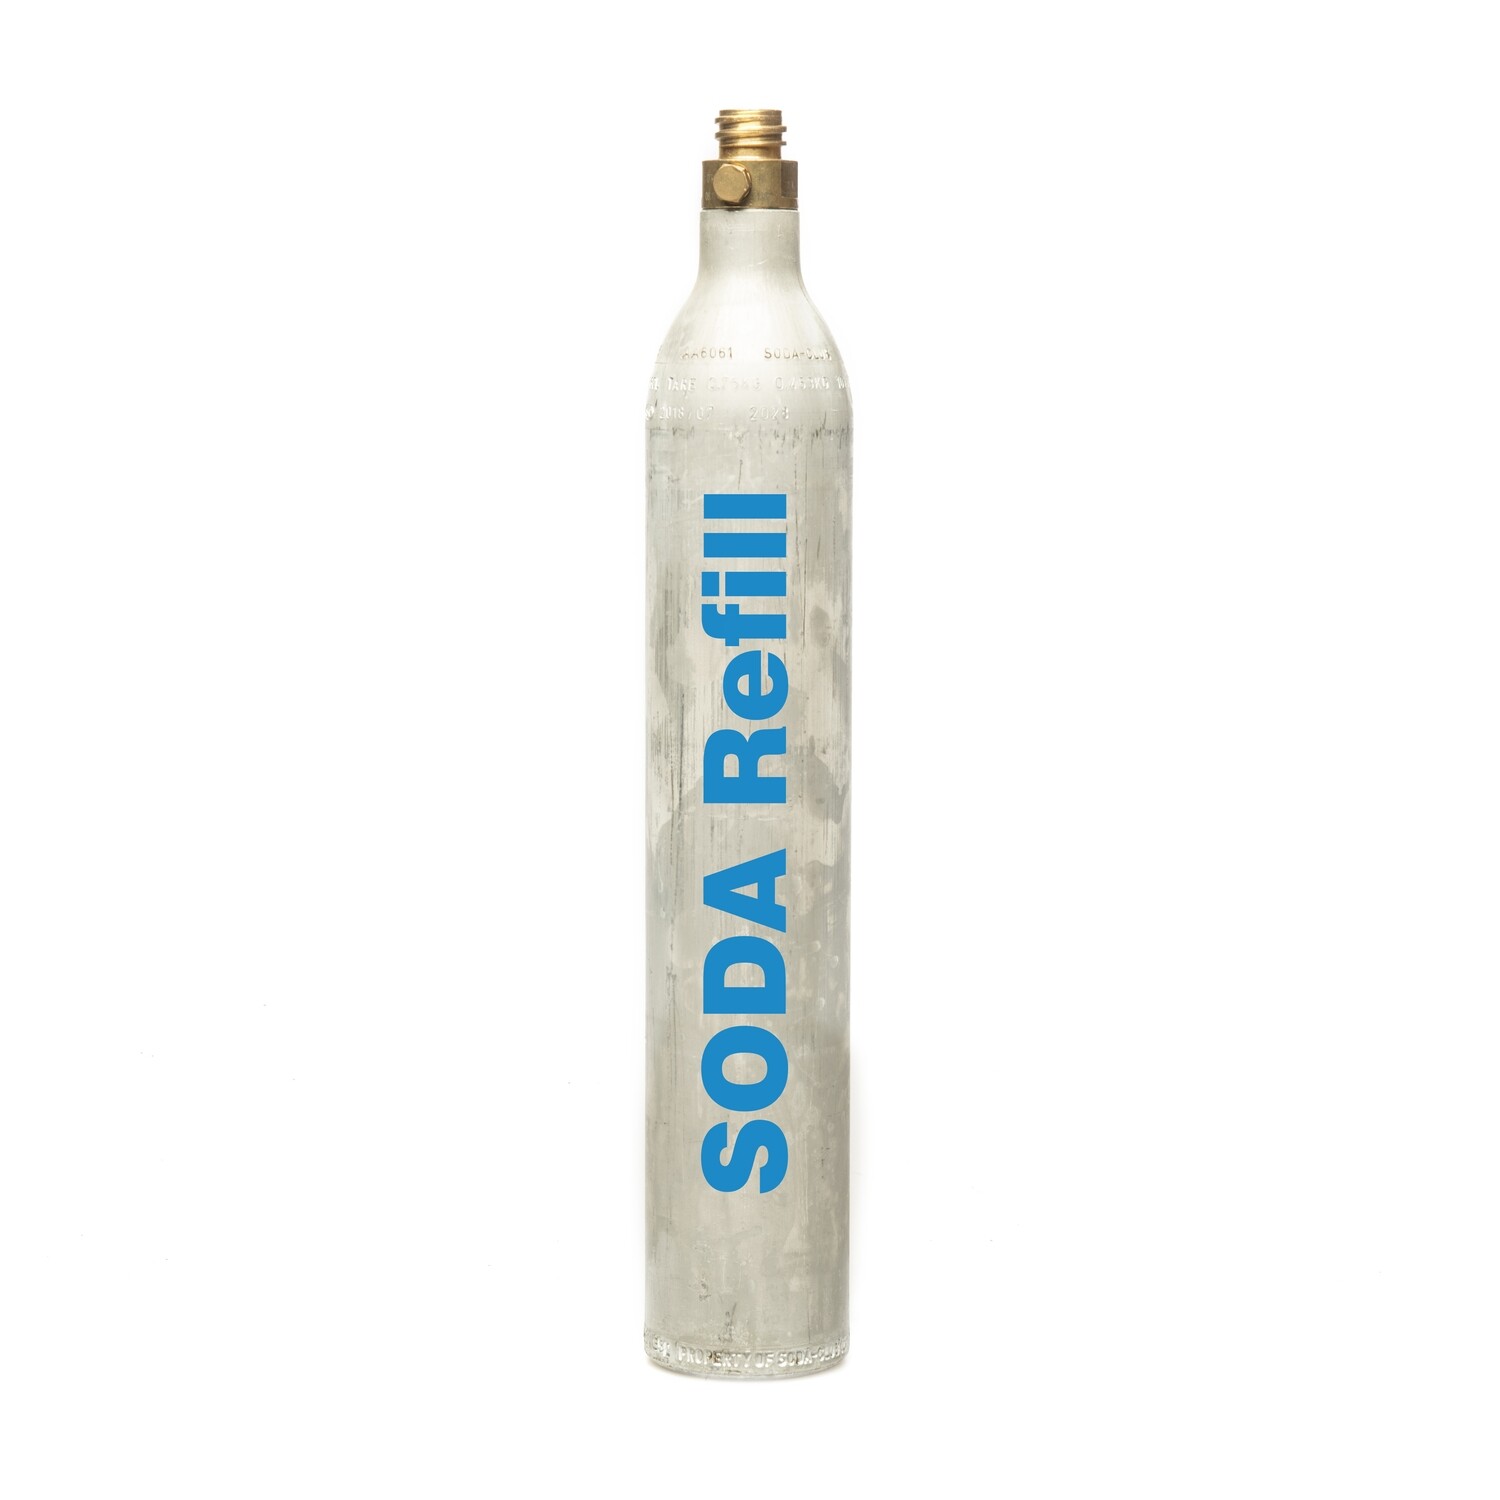 60l CO2 Refill - 1 Cylinder, Sodastream, Aarke, Sprudelux